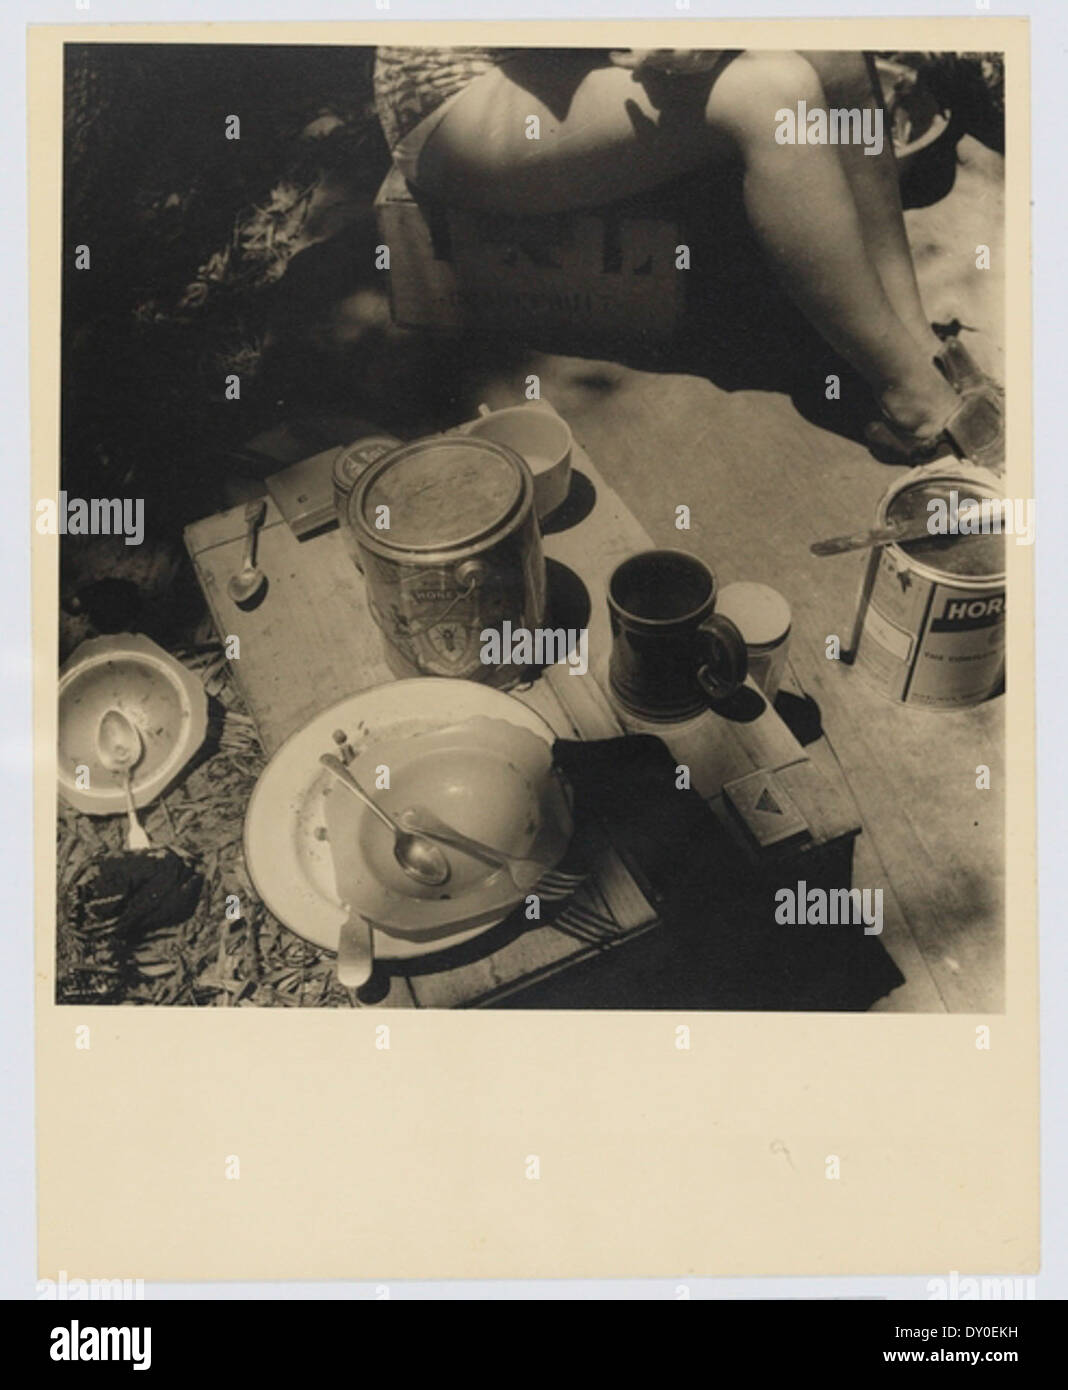 Study of plates at the campsite from Camping trips on Culburra Beach by Max Dupain and Olive Cotton Stock Photo